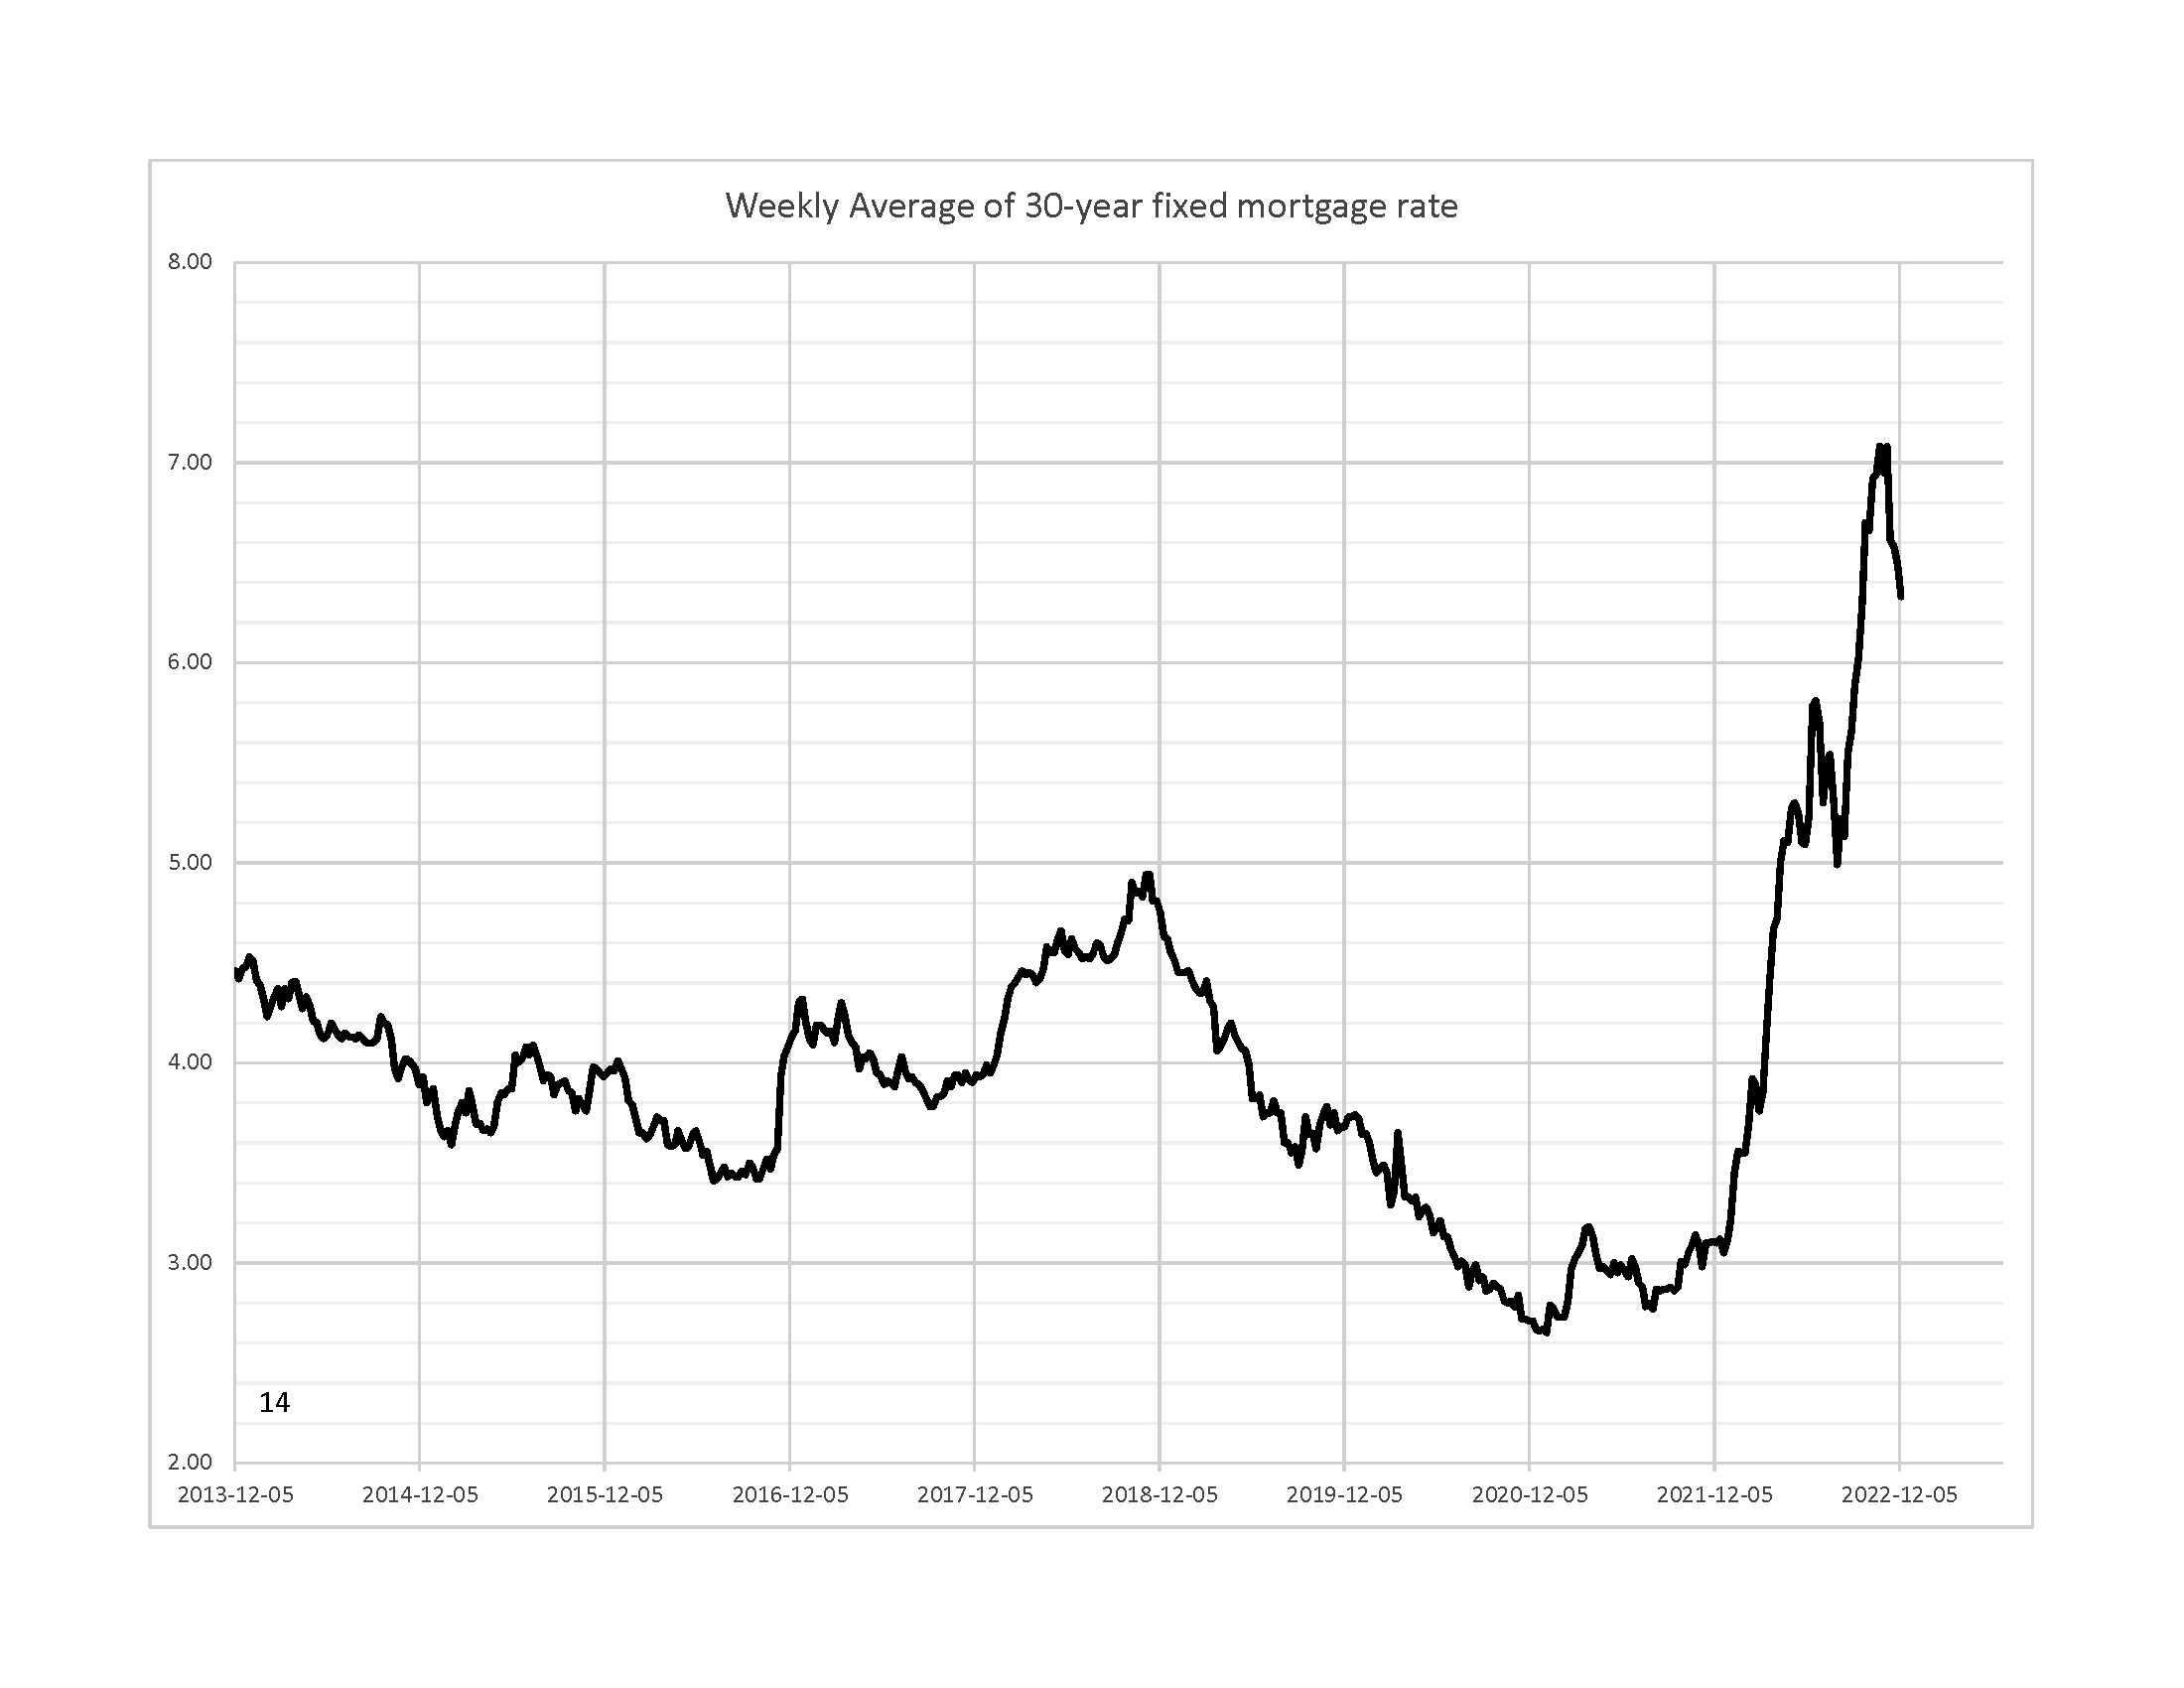 graph, current mortgage rate 30 year, trend 2013 to 2022